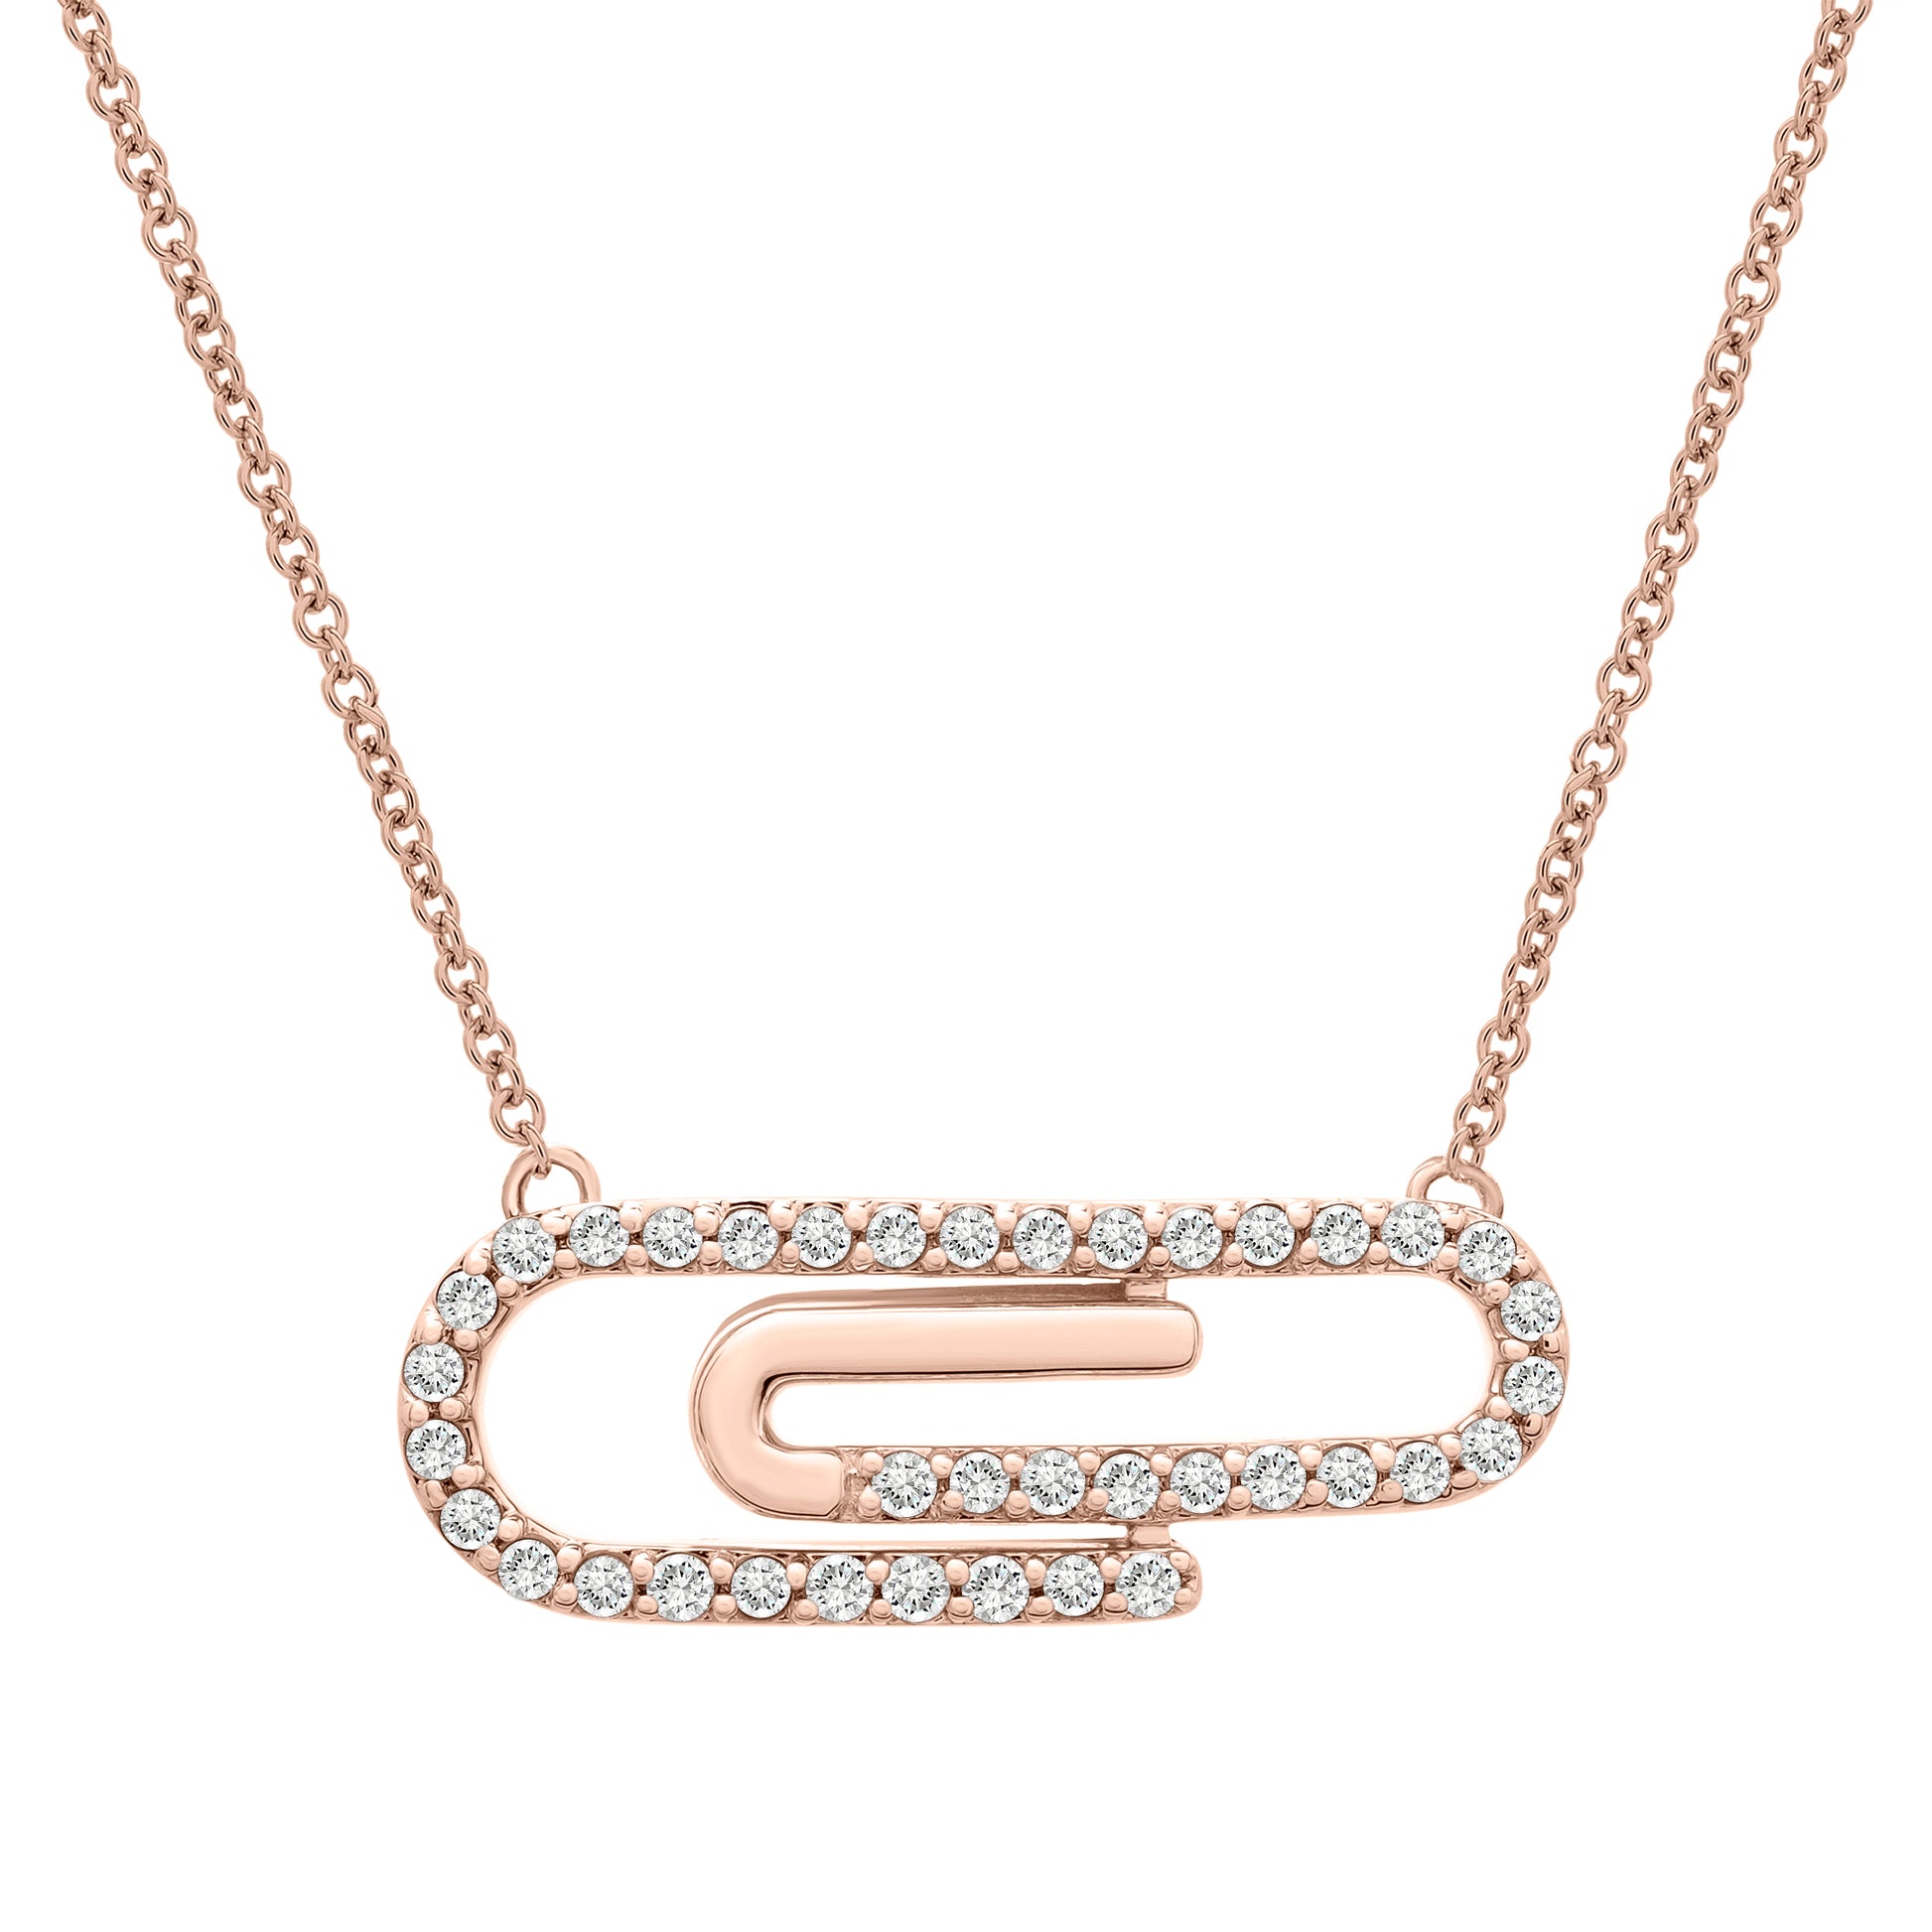 Pepita Diamond Paperclip Necklace in Rose Gold